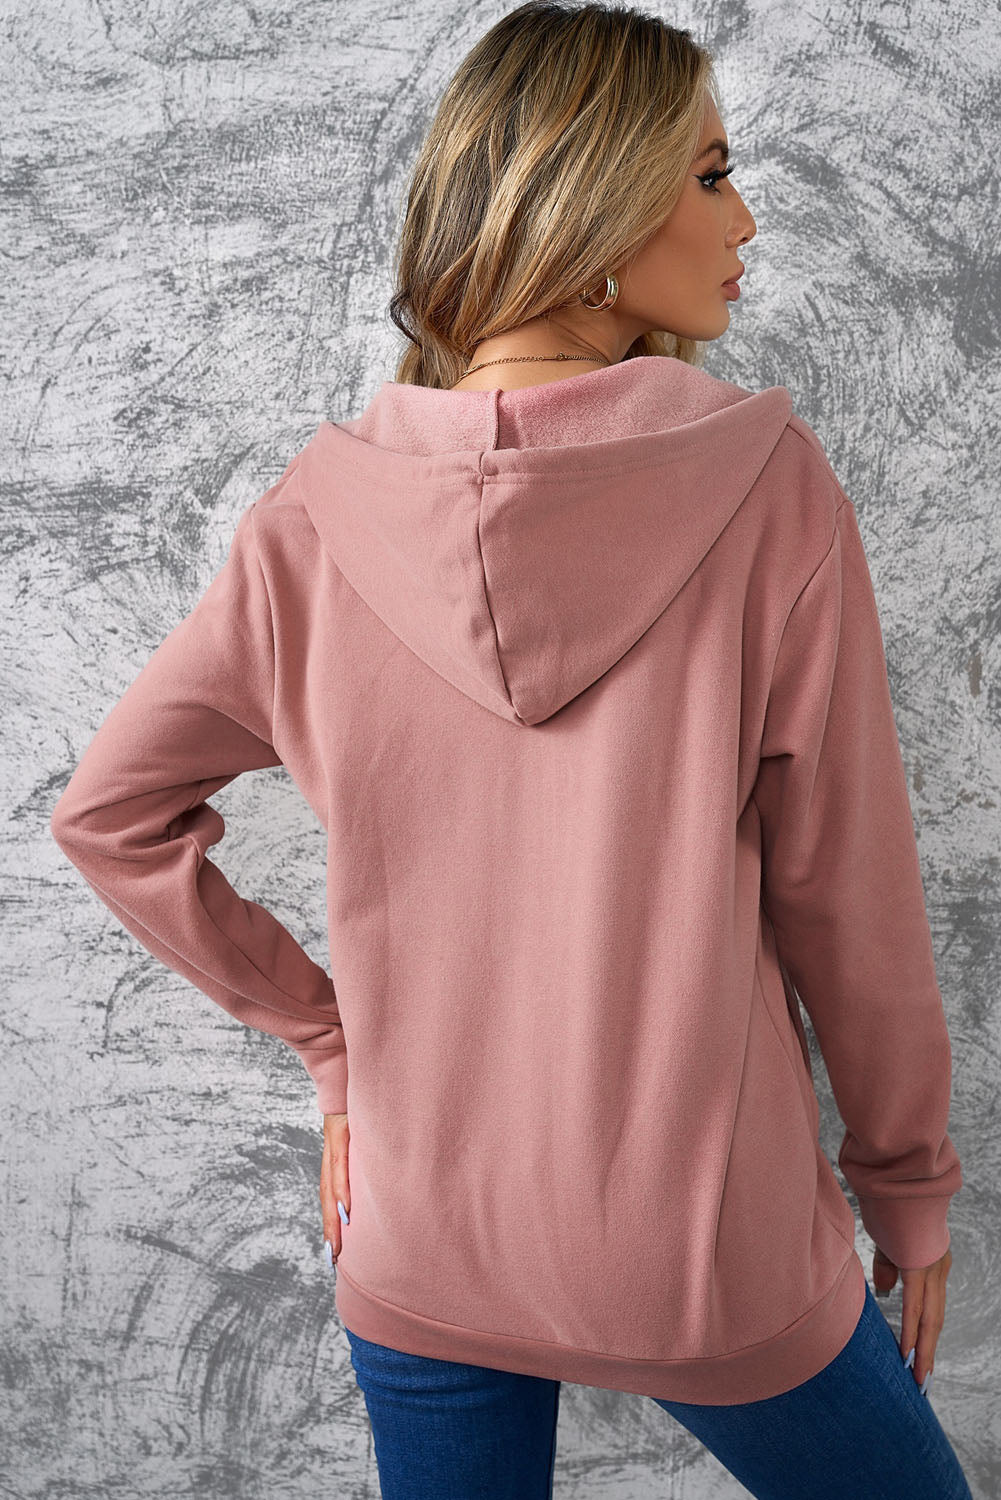 Half-Zip Drawstring Hoodie with Pockets - Women’s Clothing & Accessories - Shirts & Tops - 2 - 2024